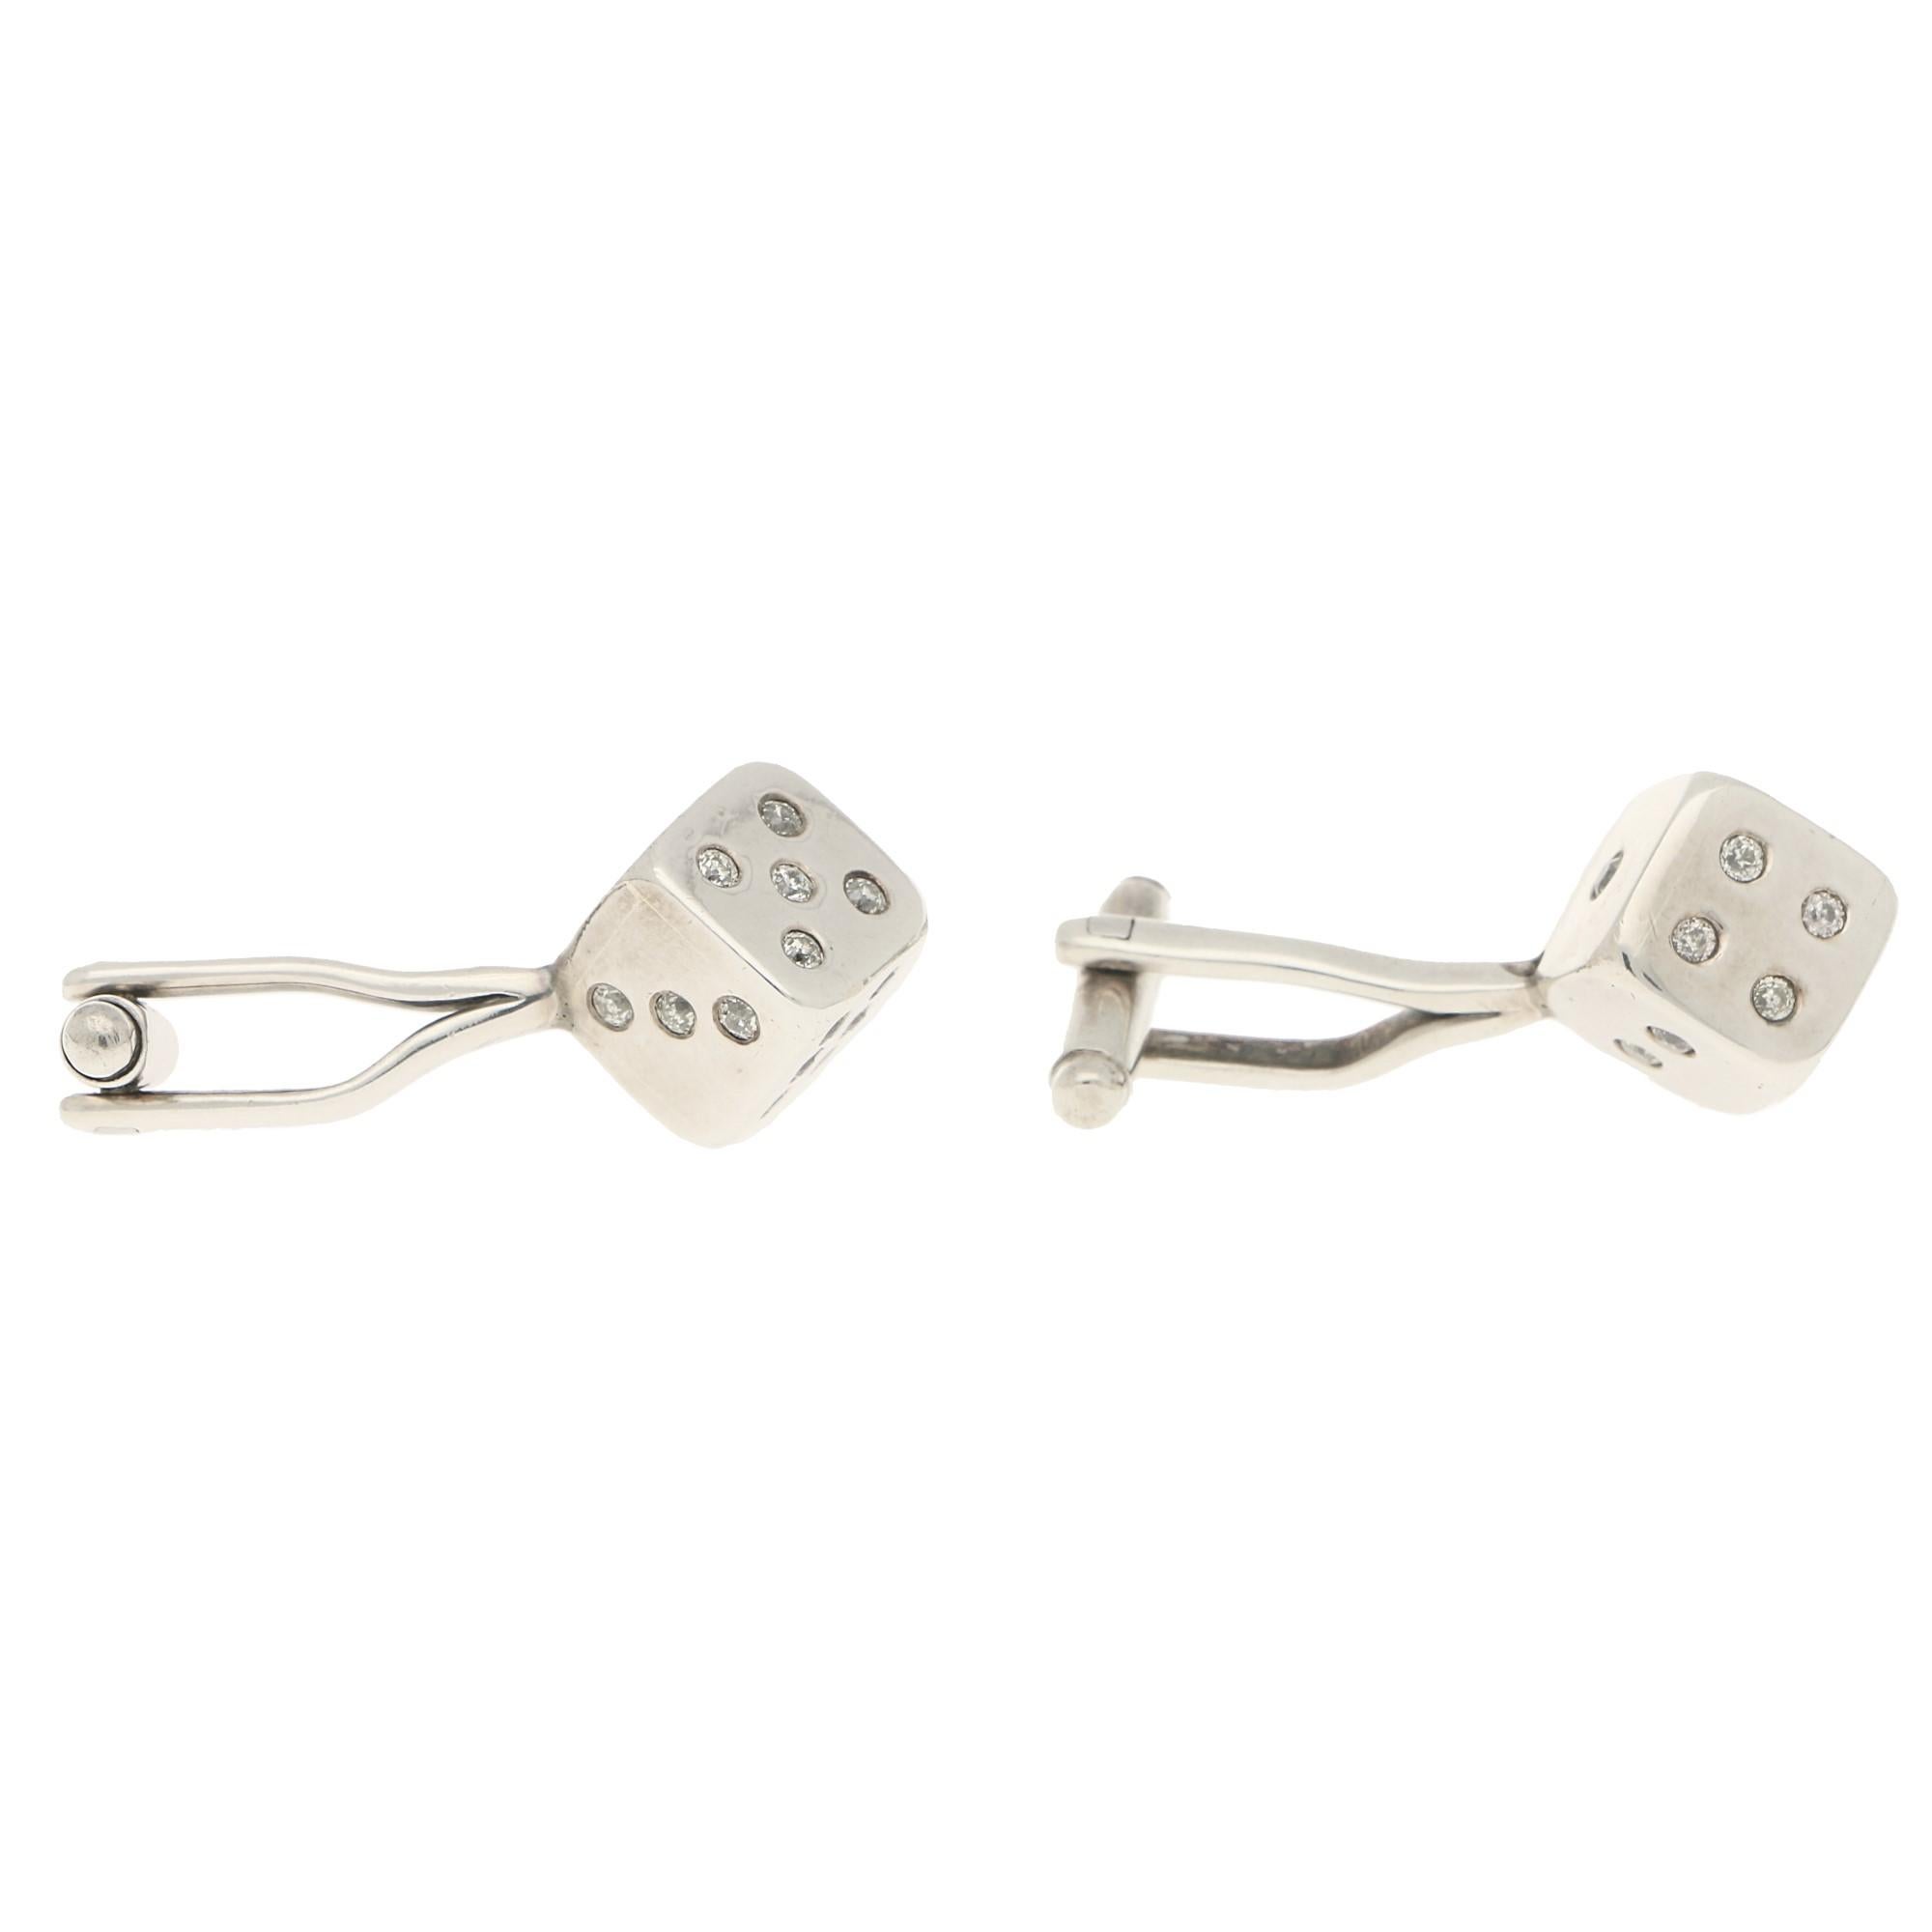 A beautiful pair of 1950's diamond set dice swivel back cufflinks in white gold.

Each cufflink depicts a 6 sided dice with each side being set with an array of old European cut diamonds. The cufflinks are beautifully detailed and the diamonds make